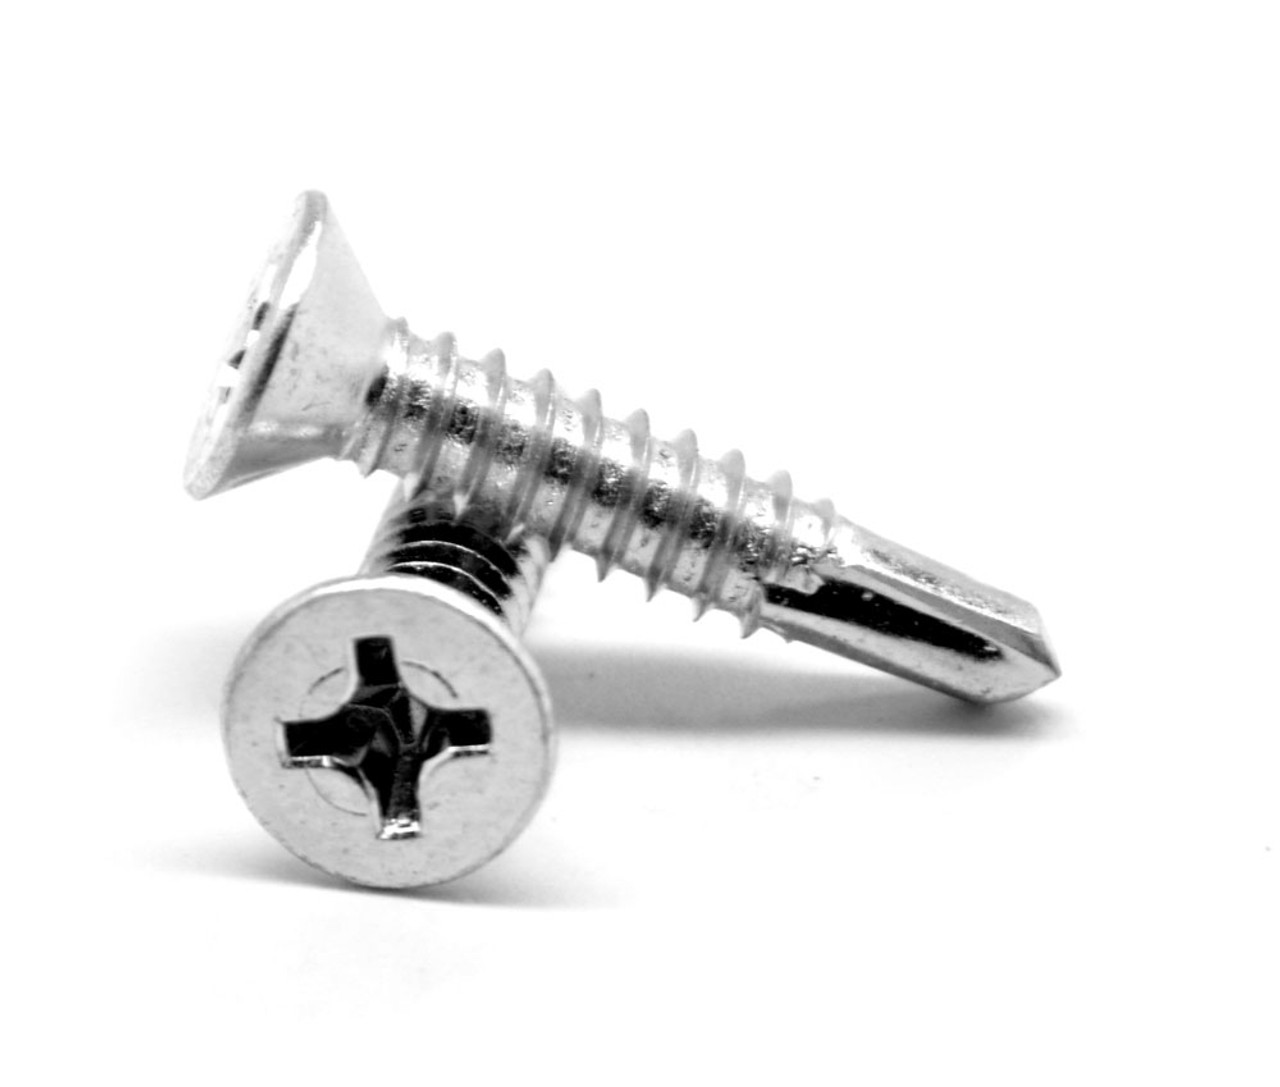 1/4-14 x 3 1/2 Self Drilling Screw Phillips Flat Head #3 Point Stainless Steel 18-8